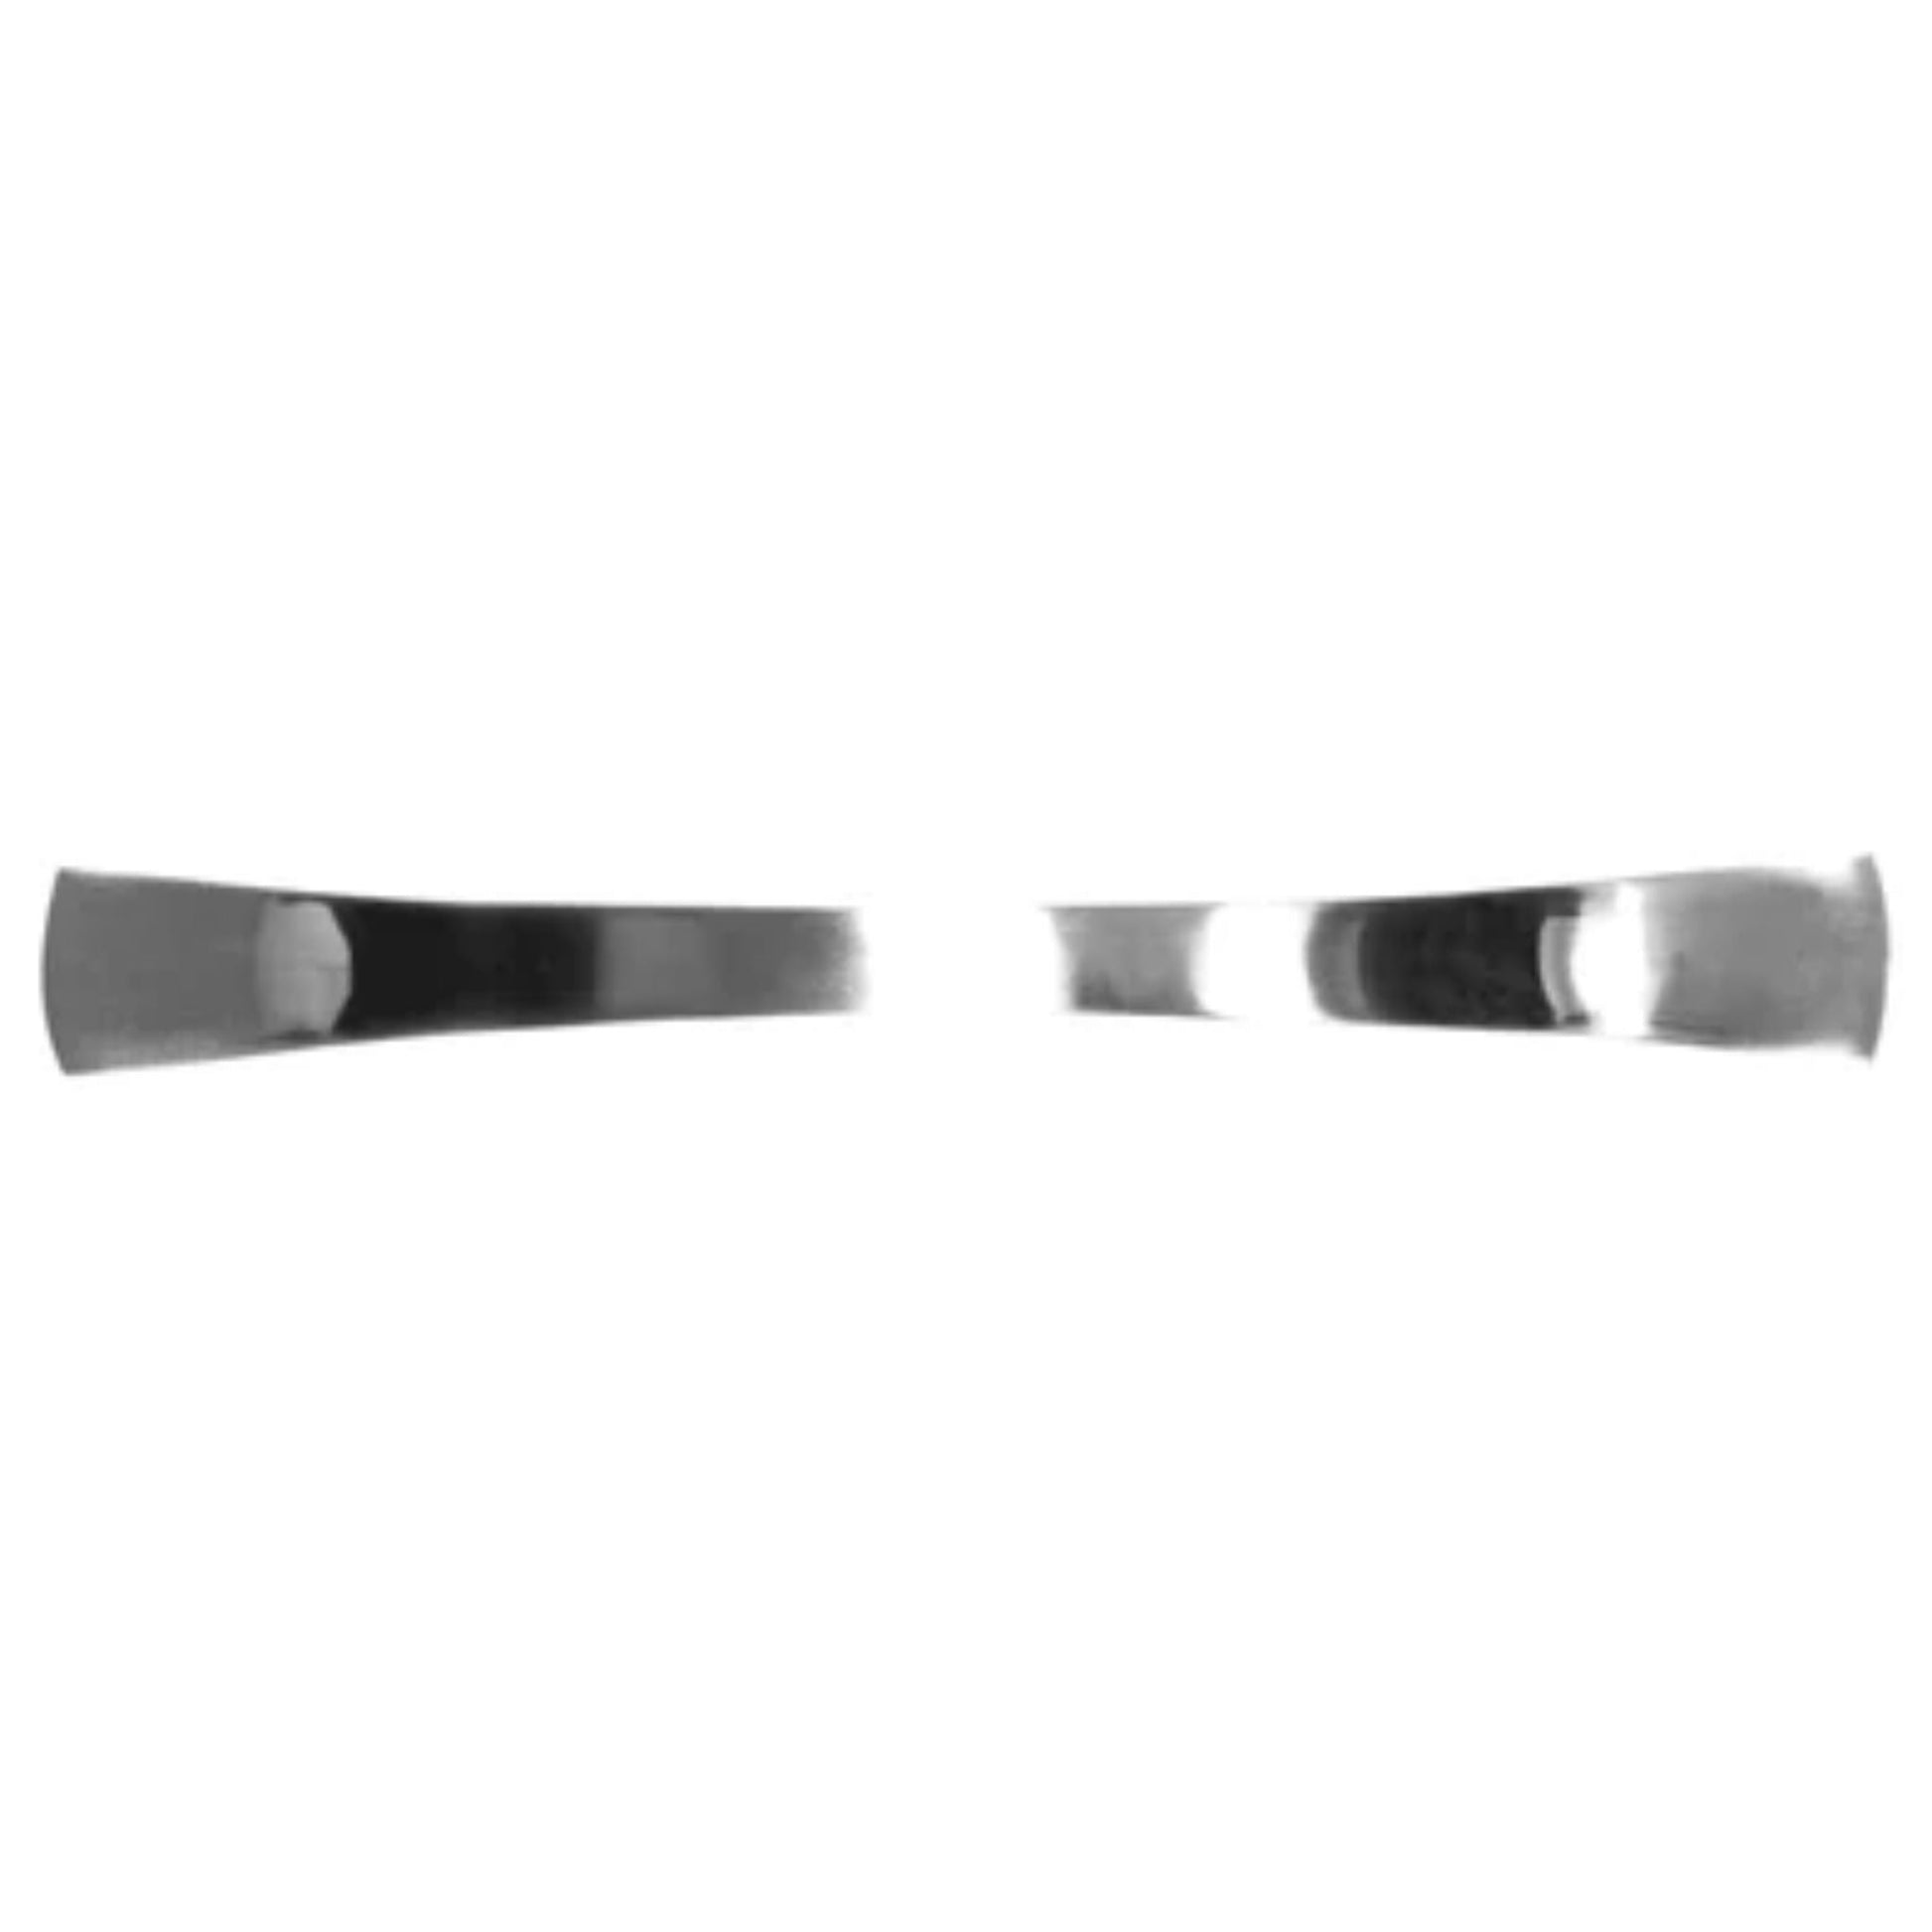 LessCare 5.375" Brushed Nickel Door/Drawer Pull - P-4